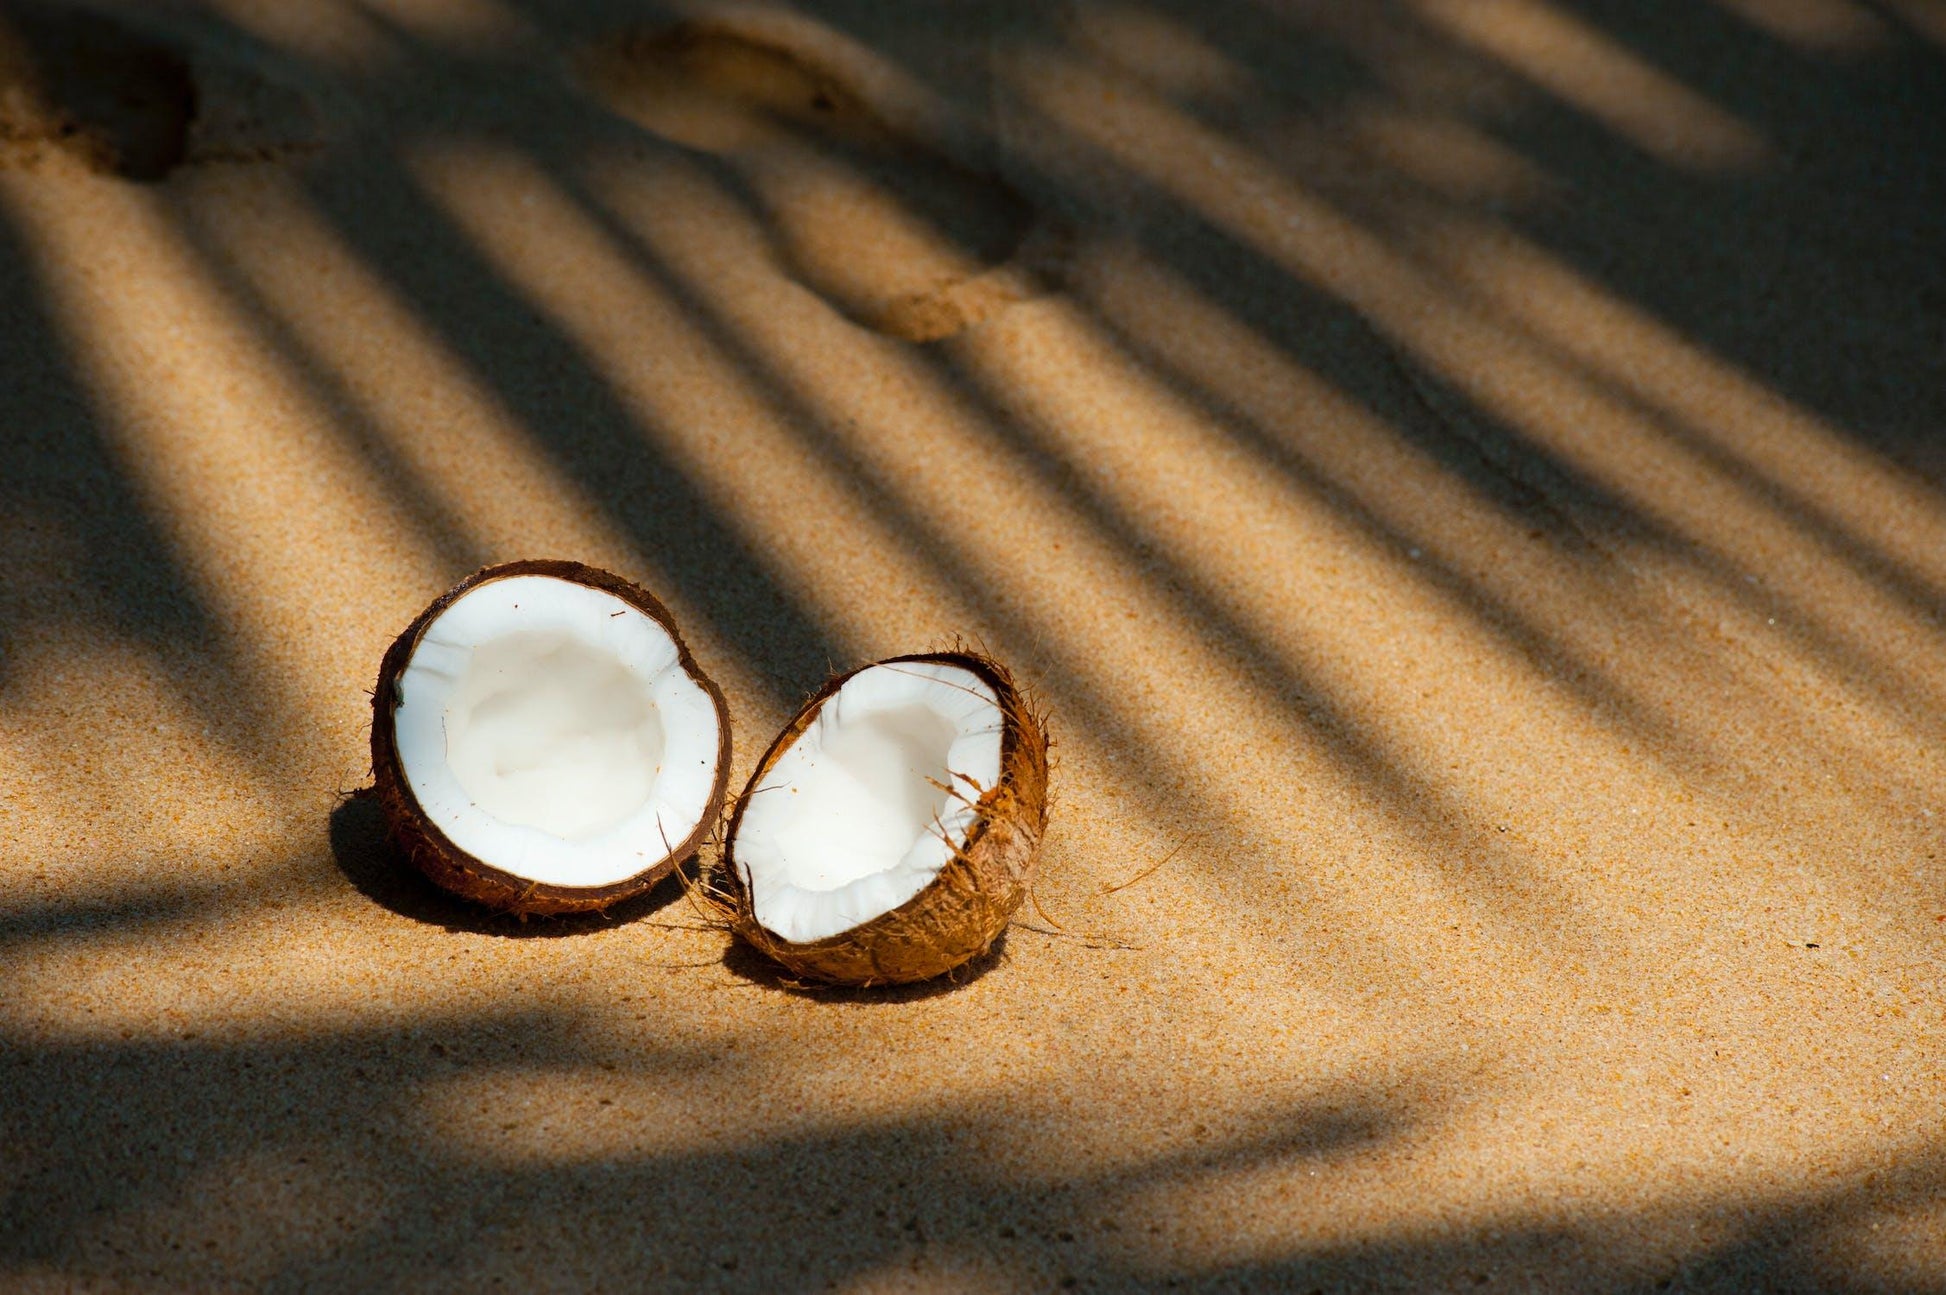 Organic Pure Extra Virgin Coconut Oil - The Ultimate Multipurpose Oil - Earth Thanks - Organic Pure Extra Virgin Coconut Oil - The Ultimate Multipurpose Oil - natural, vegan, eco-friendly, organic, sustainable, baking, coconut, coconut oil, cold-press, cooking, diy, do it yourself, essential oil, extra virgin, face care, hair care, ingredient, ingredients, massage oil, multipurpose, natural properties, nutrients, organic, pure, skin, skin care, sustainable, sustainably-grown